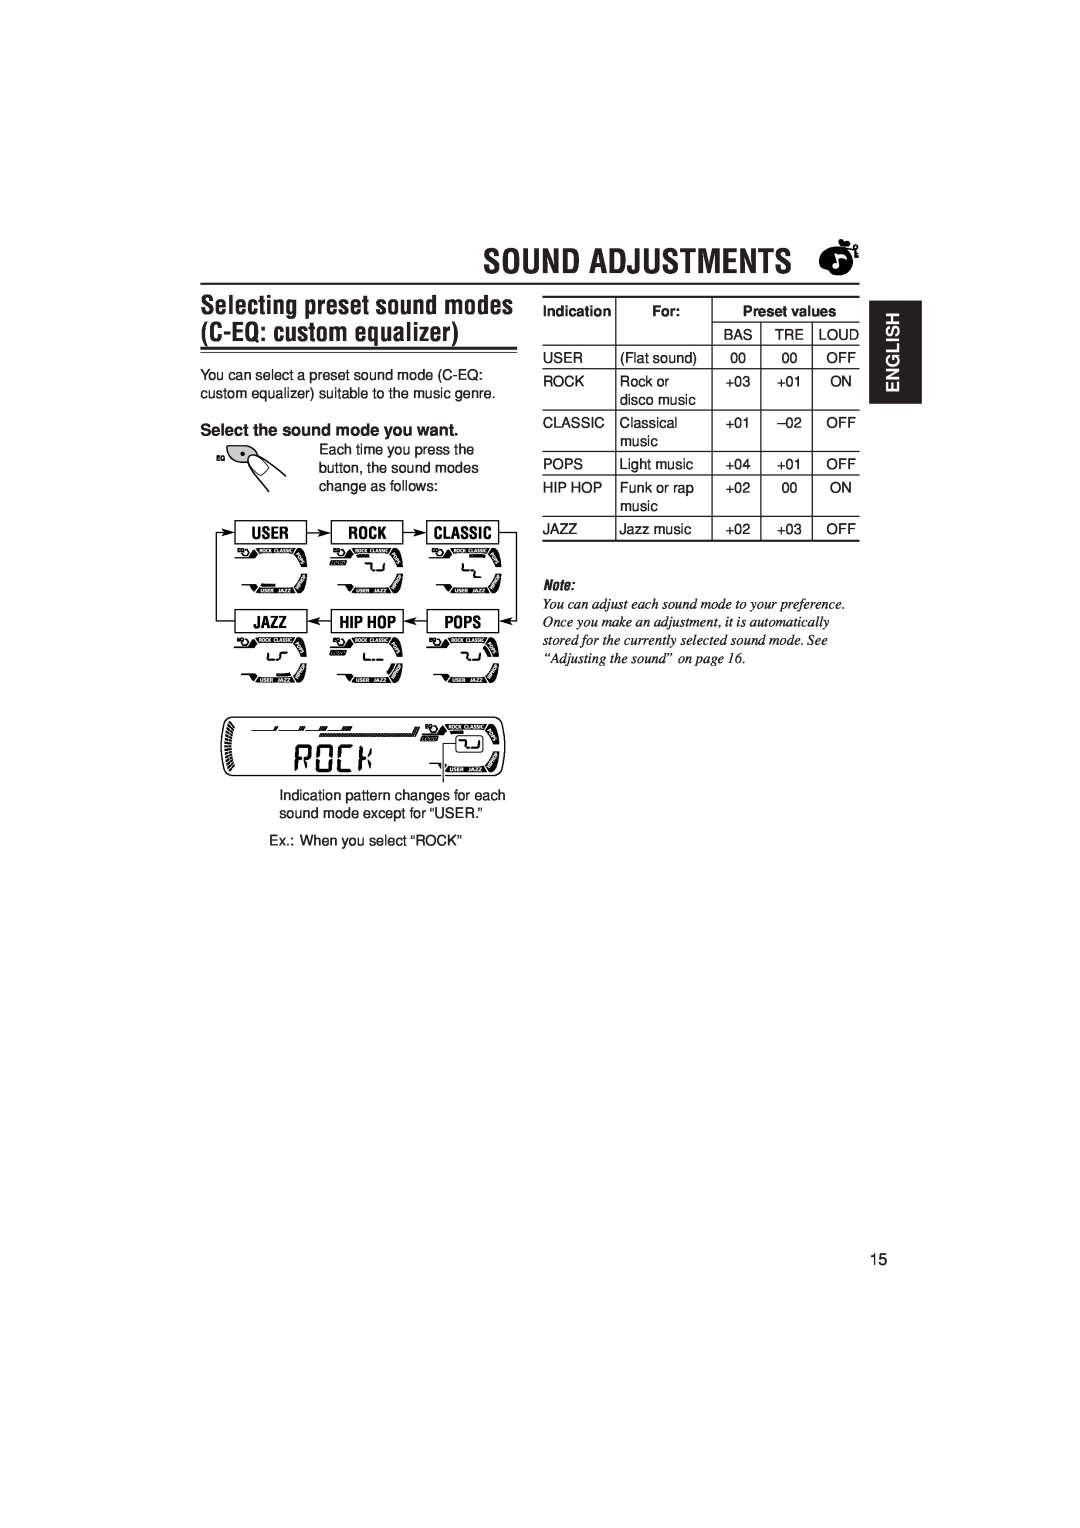 JVC KD-G205 manual Sound Adjustments, Select the sound mode you want, User Rock Classic, Jazz, Hip Hop, Pops, Indication 